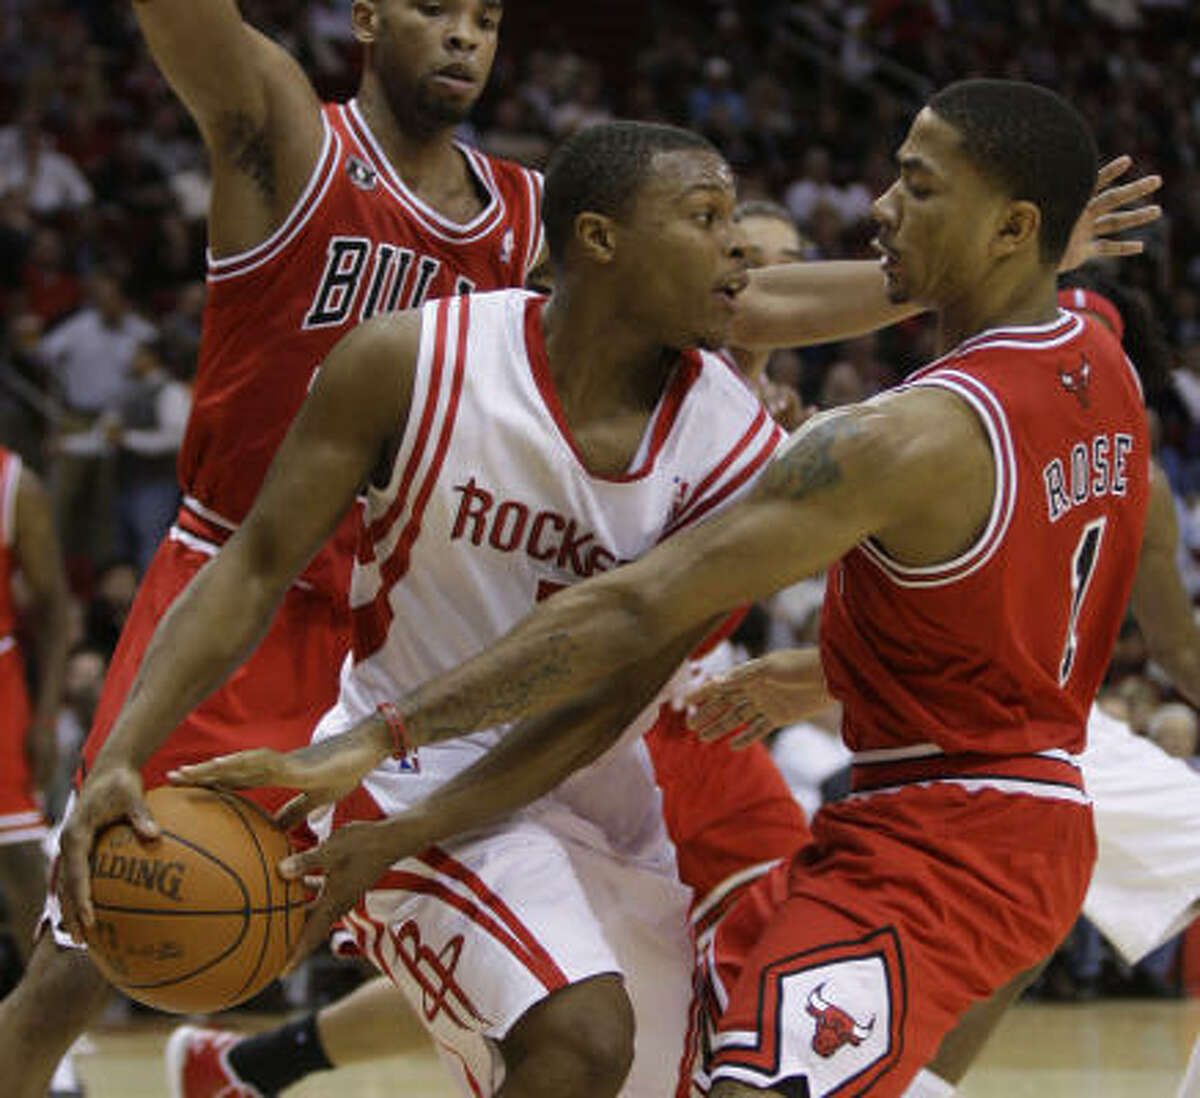 Rockets guard Kyle Lowry, left, looks to get past Bulls guard Derrick Rose, right, during the first quarter.